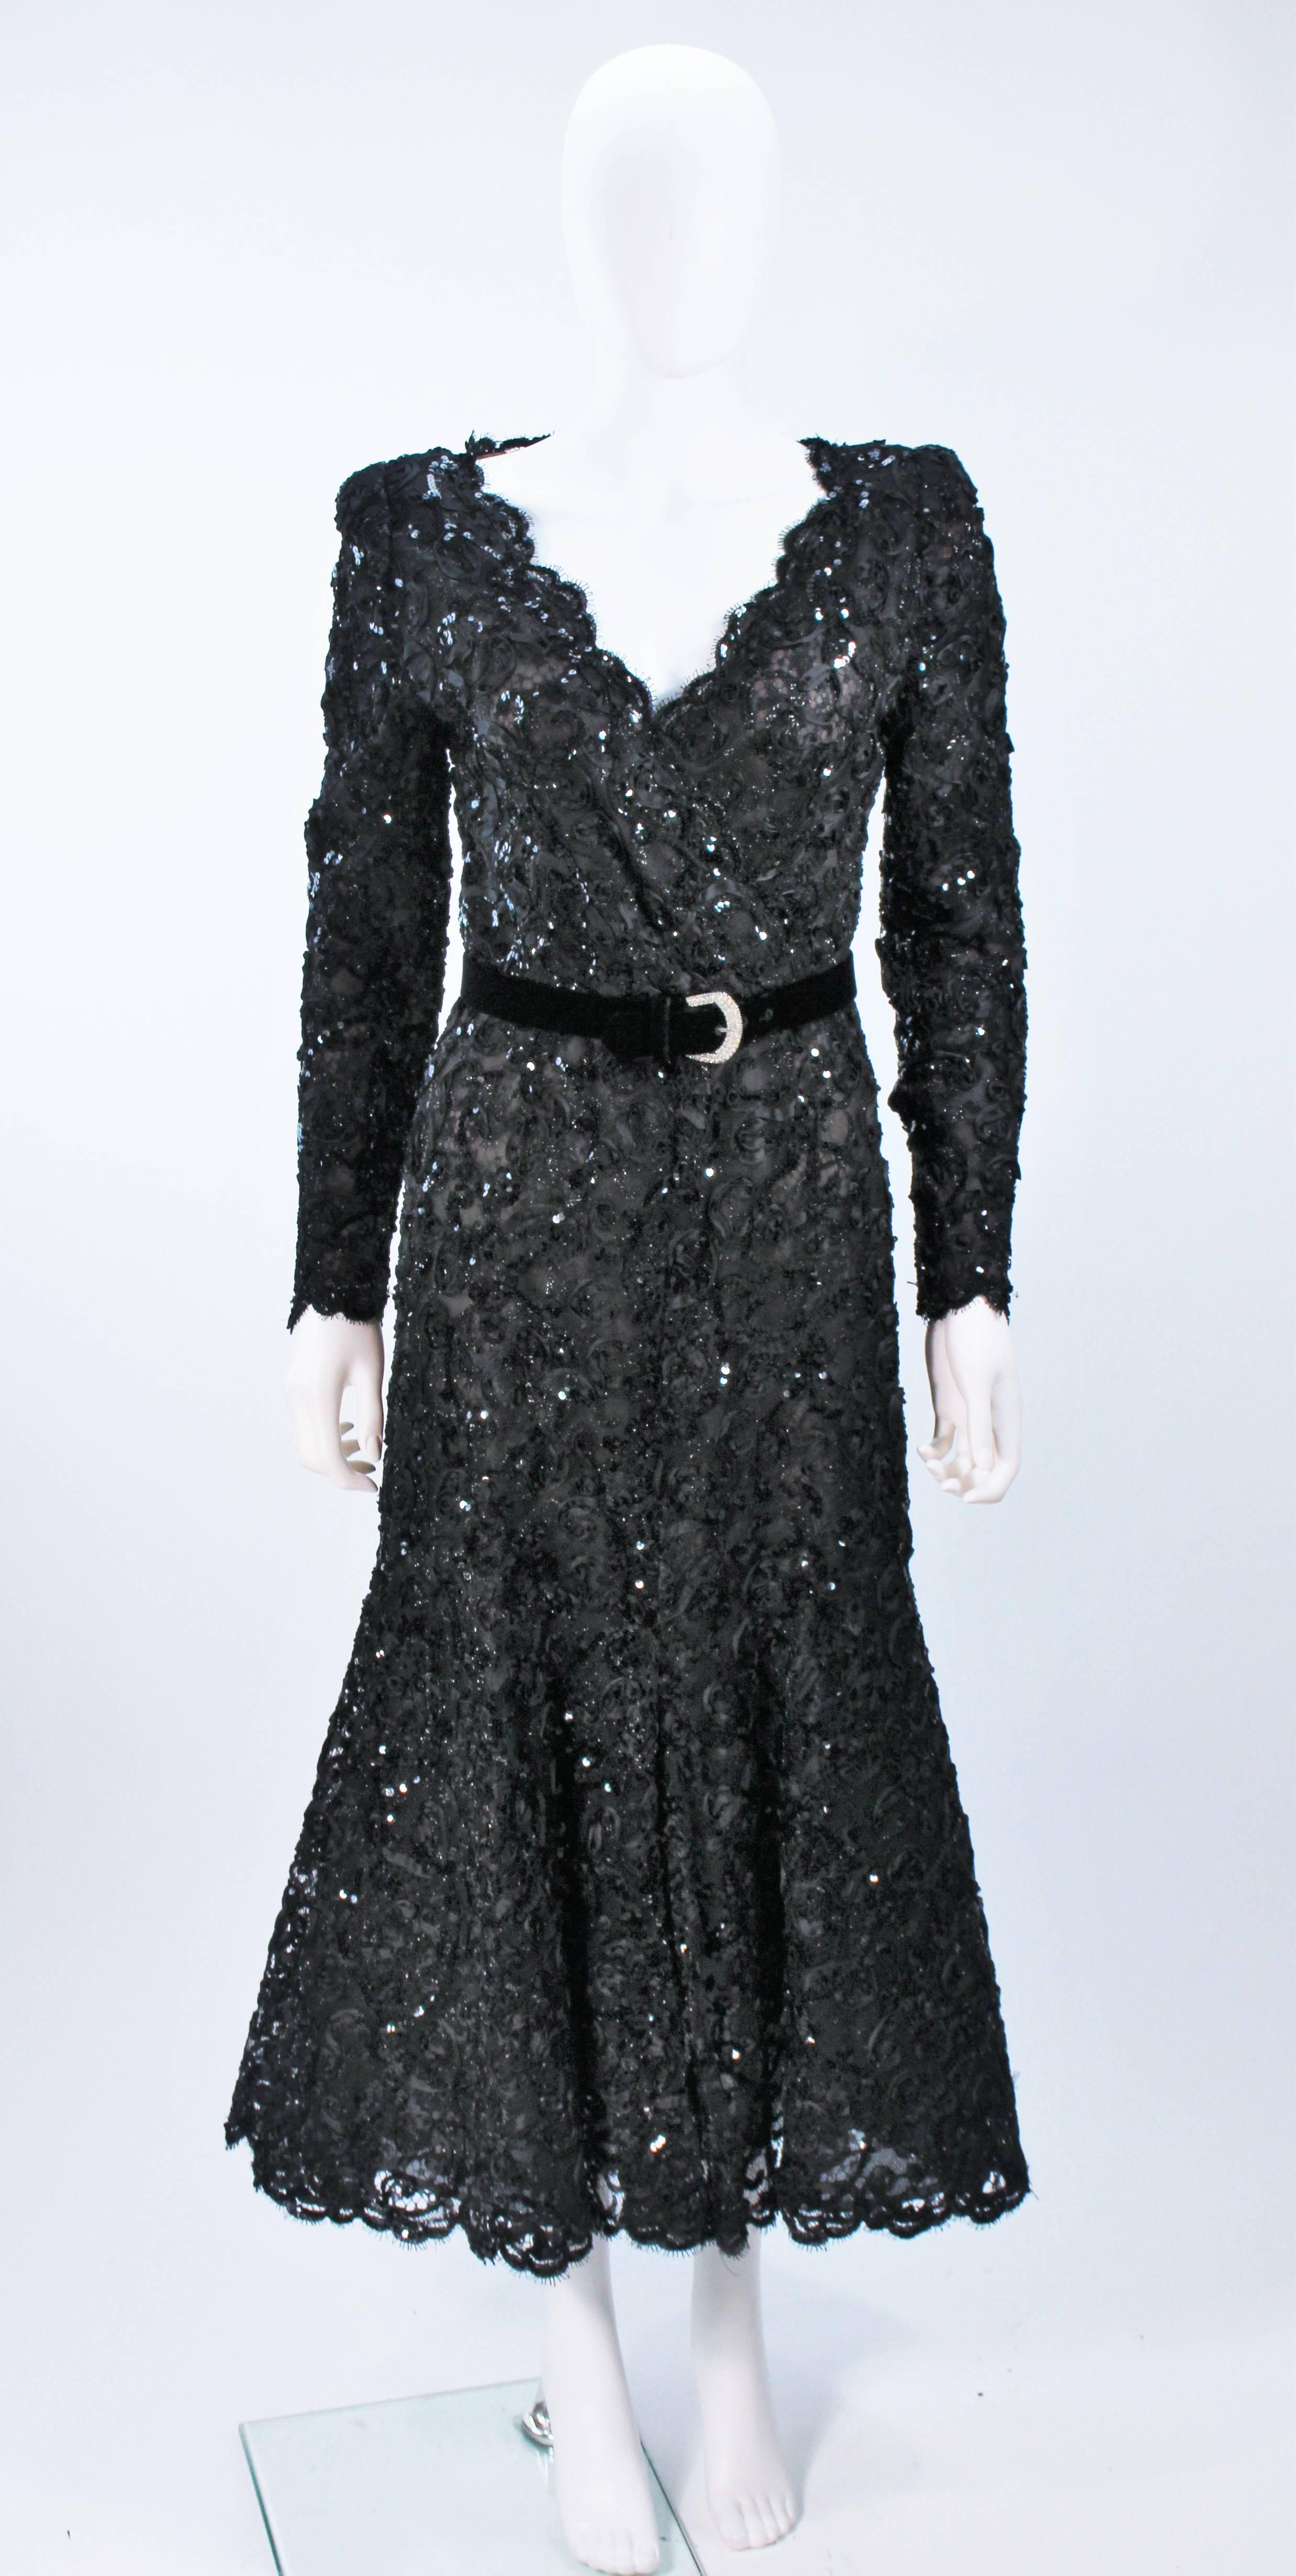  This Oscar De La Renta dress is composed of a sequin black lace with scalloped edging. There is a center back zipper closure. Belt has rhinestone buckle. In excellent vintage condition. 

  **Please cross-reference measurements for personal